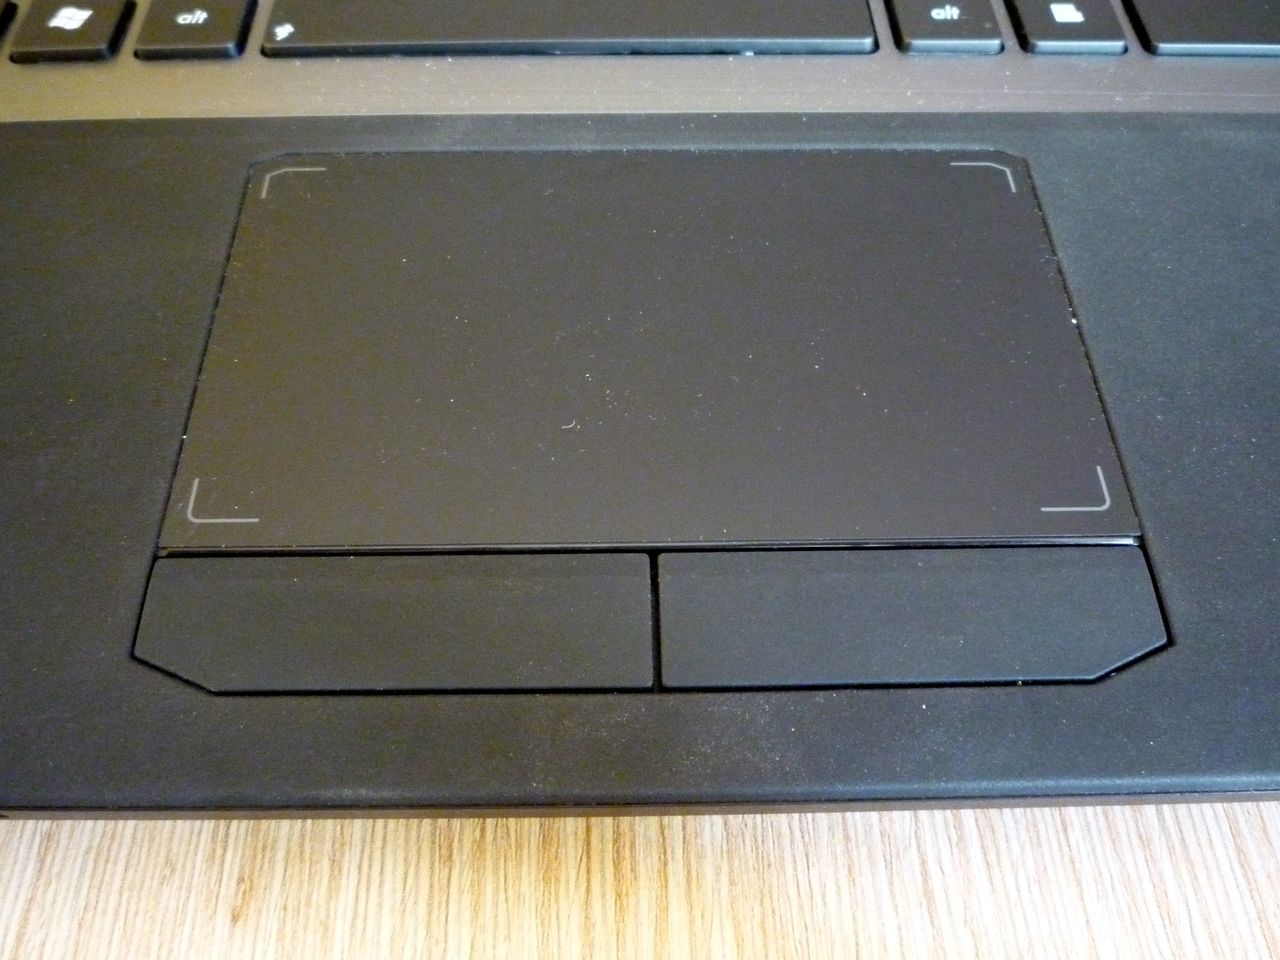 Asus G75VW 3D - touchpad